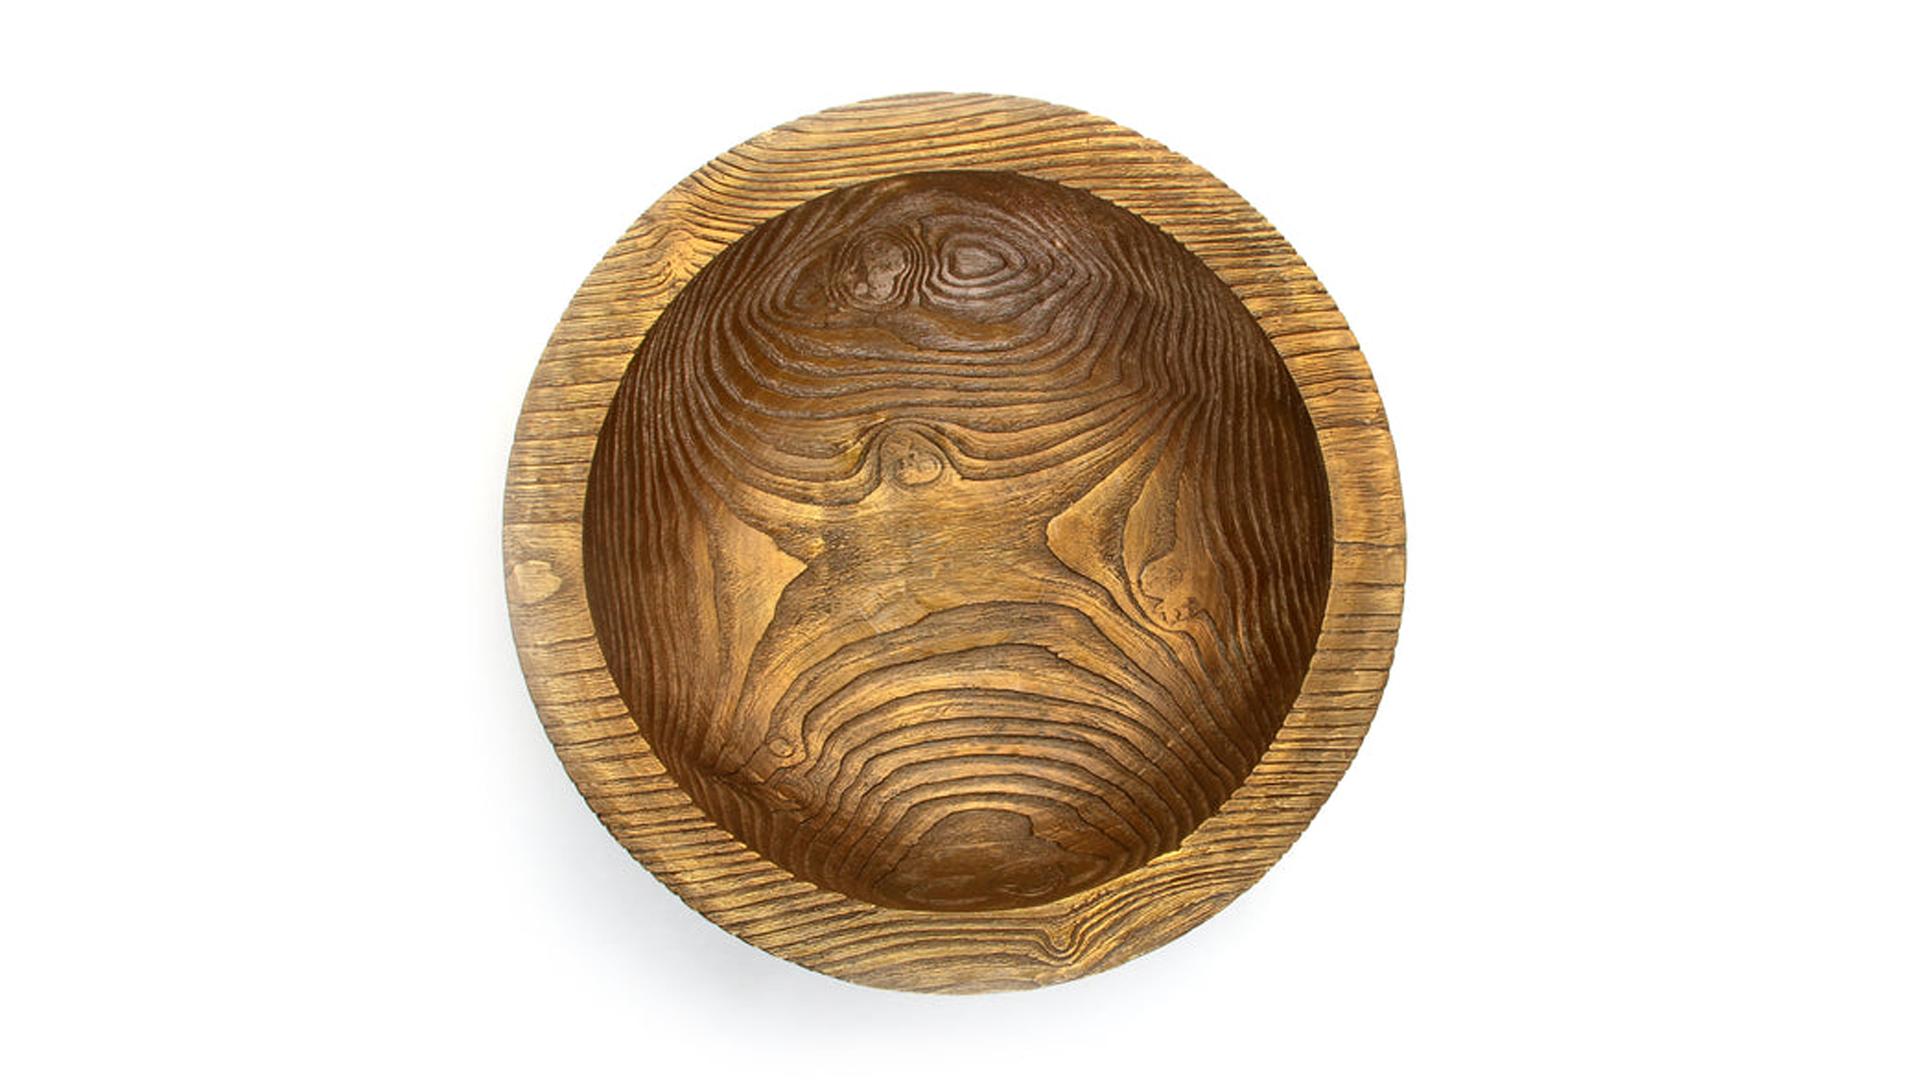 Cast from solid bronze, the Everest Vessel / Bowl is a functional and sculptural work with Wood Grain Detail and Golden Patina.
Inspired by silhouettes found in nature, CHAABAN sought to create a line of unique bronzewares and premium home